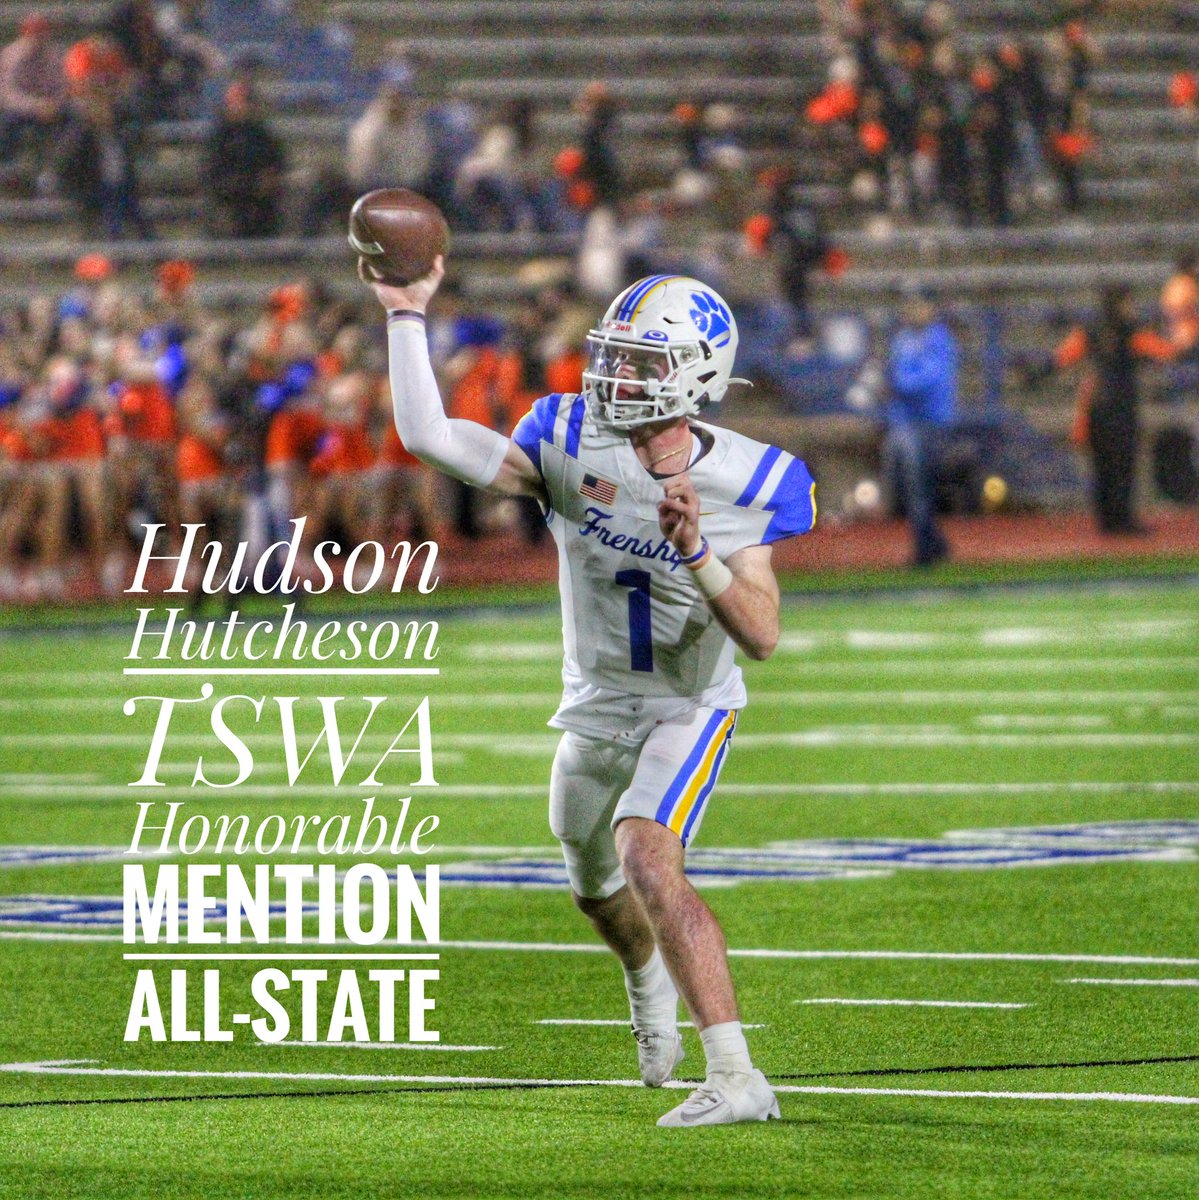 Congrats to @HudsonHutcheson on being named to the Texas Sports Writers Association All-State Honorable Mention Team. #FrenshipNation #ItsAGreatDayToBeATiger #WeAreFrenship @SemperImpetus @FrenshipSports